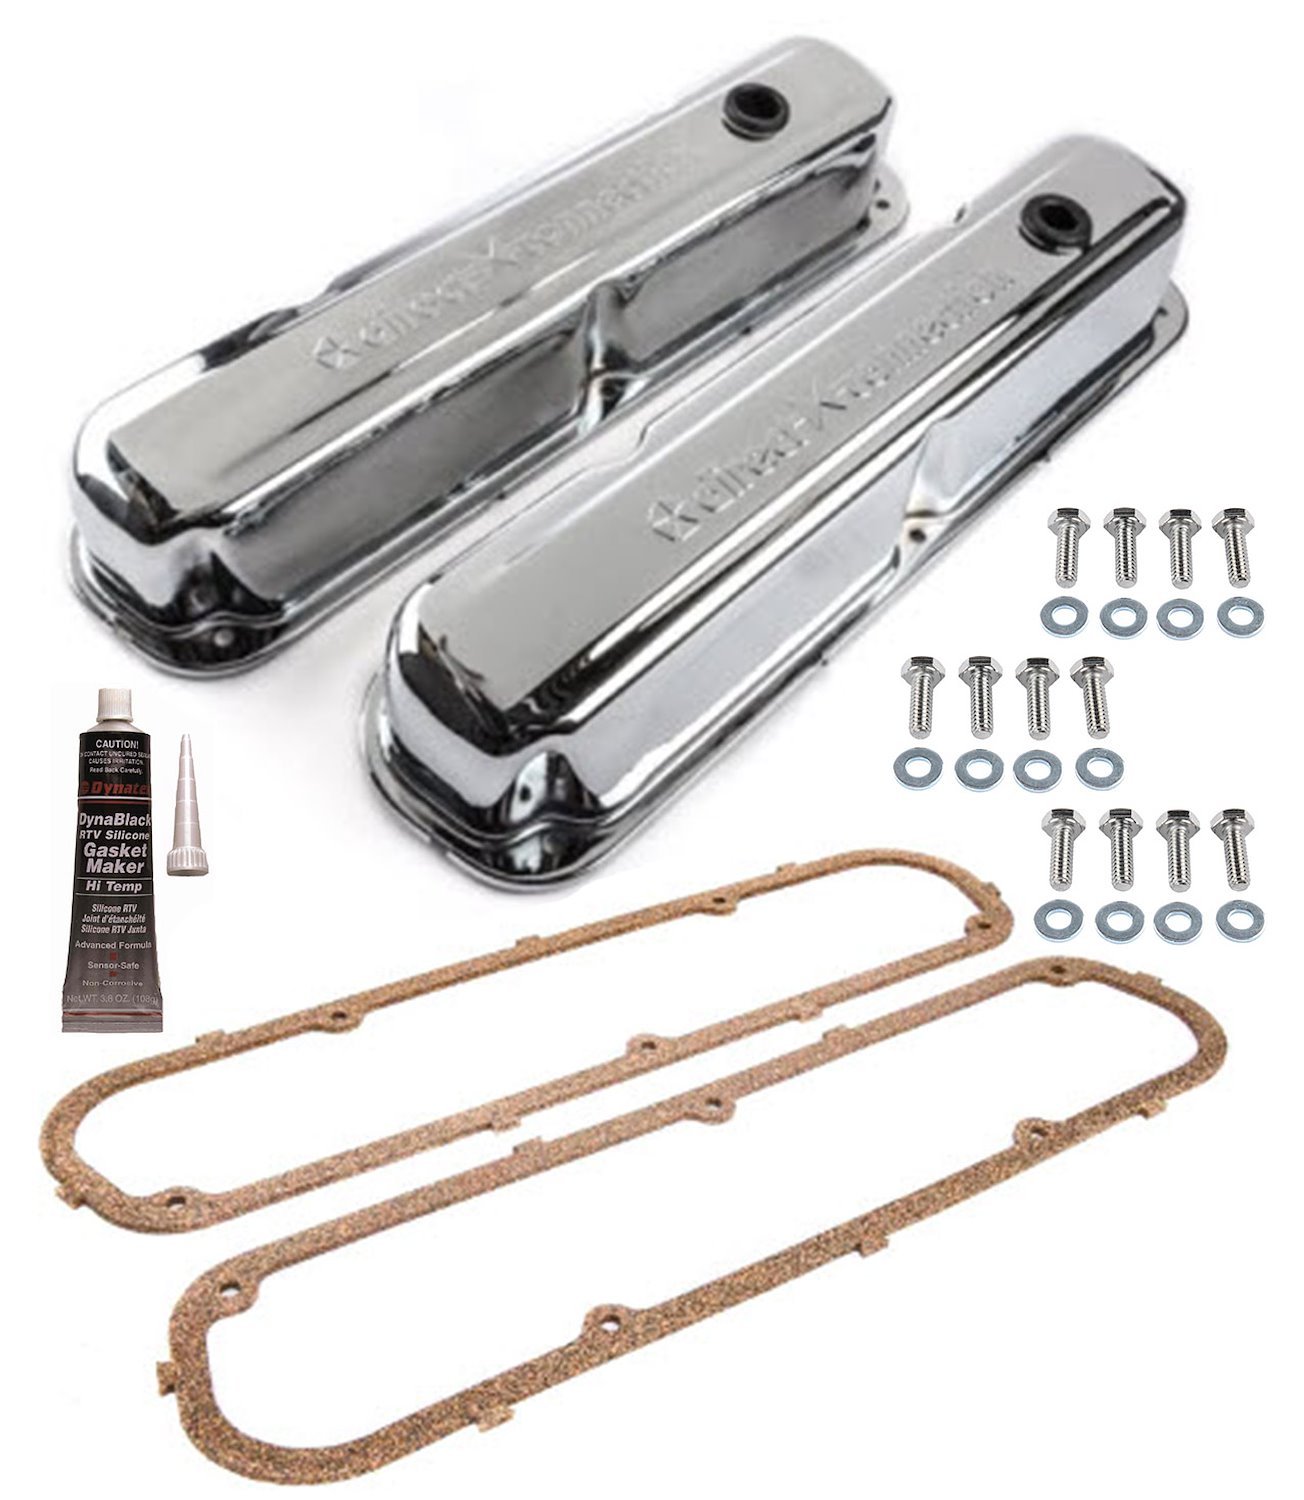 P4349632AB Chrome-Plated Steel Valve Cover Kit for Mopar Small Block (LA) Engines